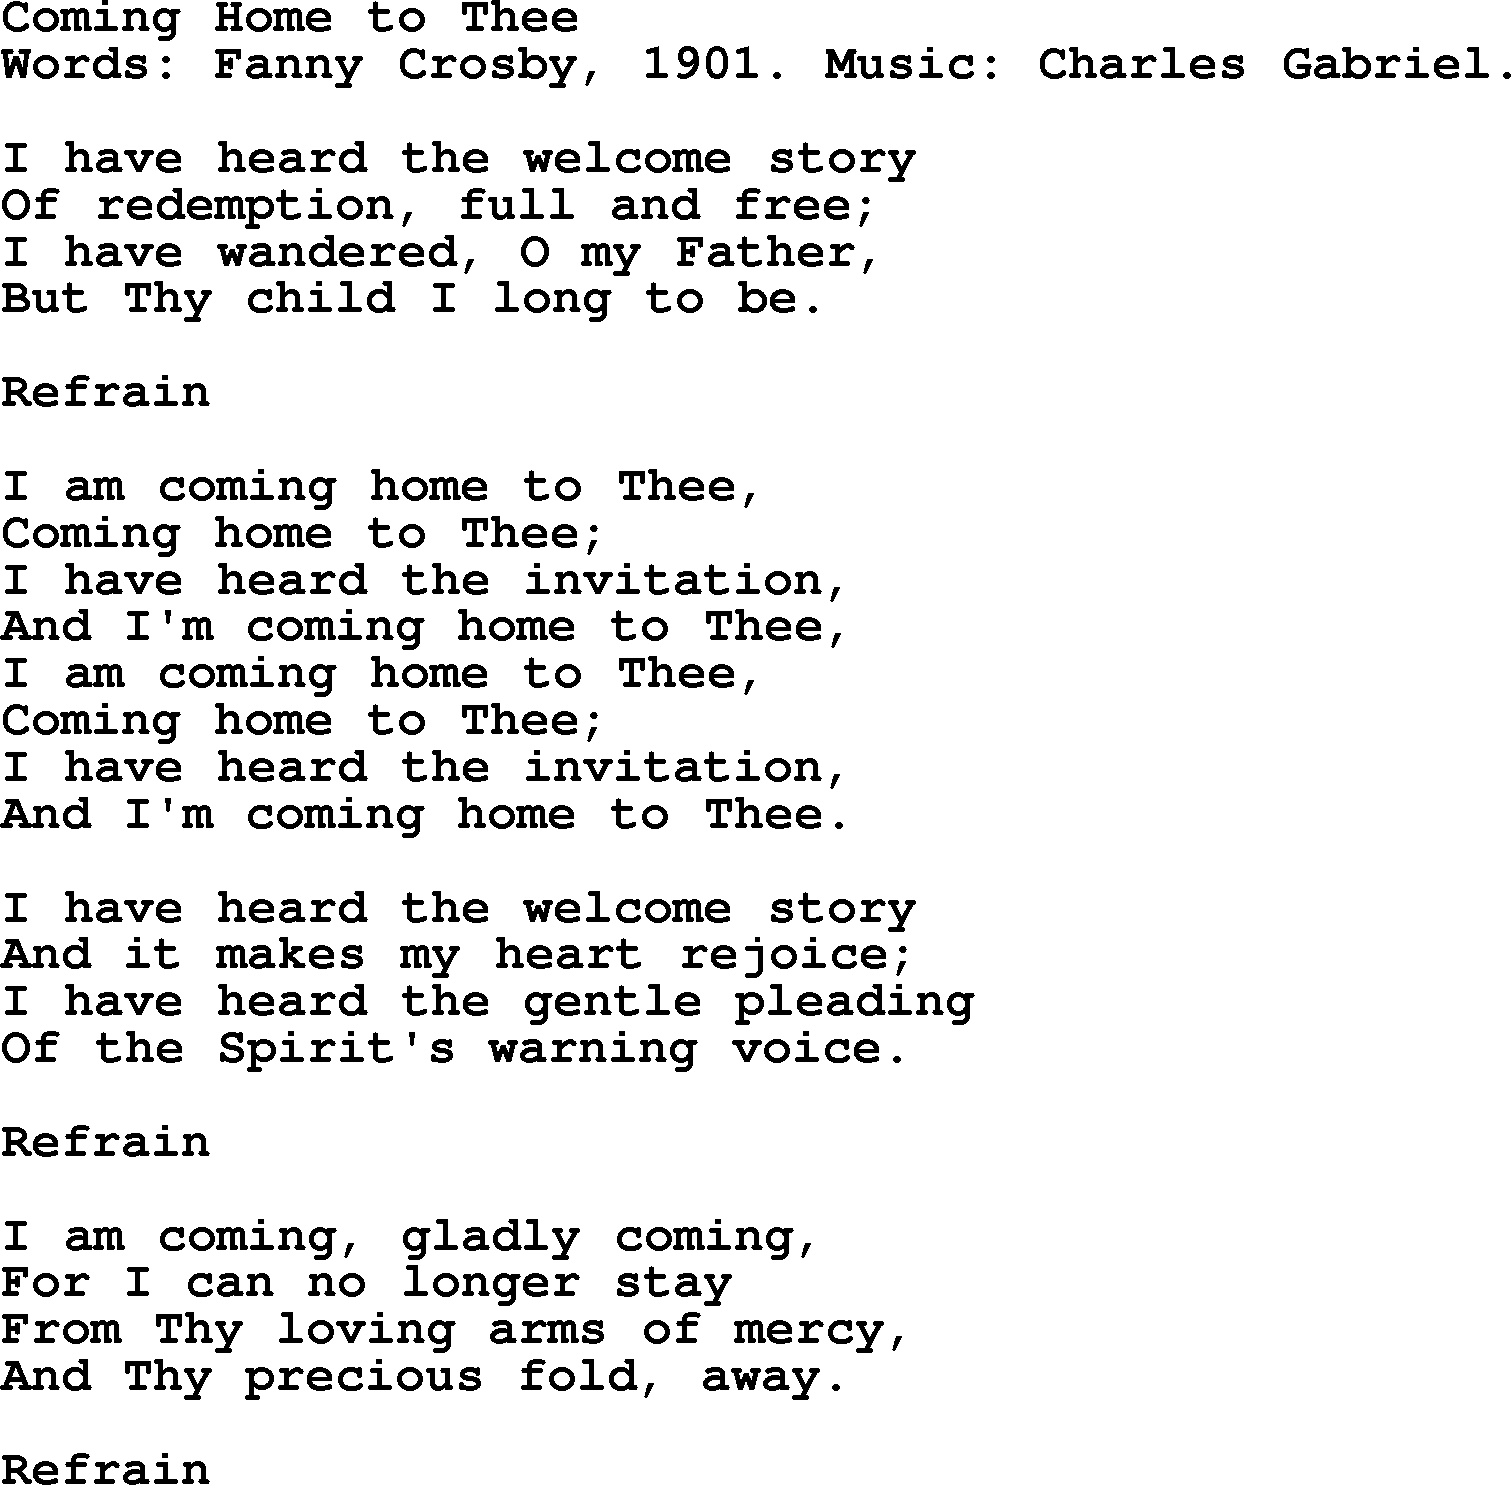 Fanny Crosby song: Coming Home To Thee, lyrics